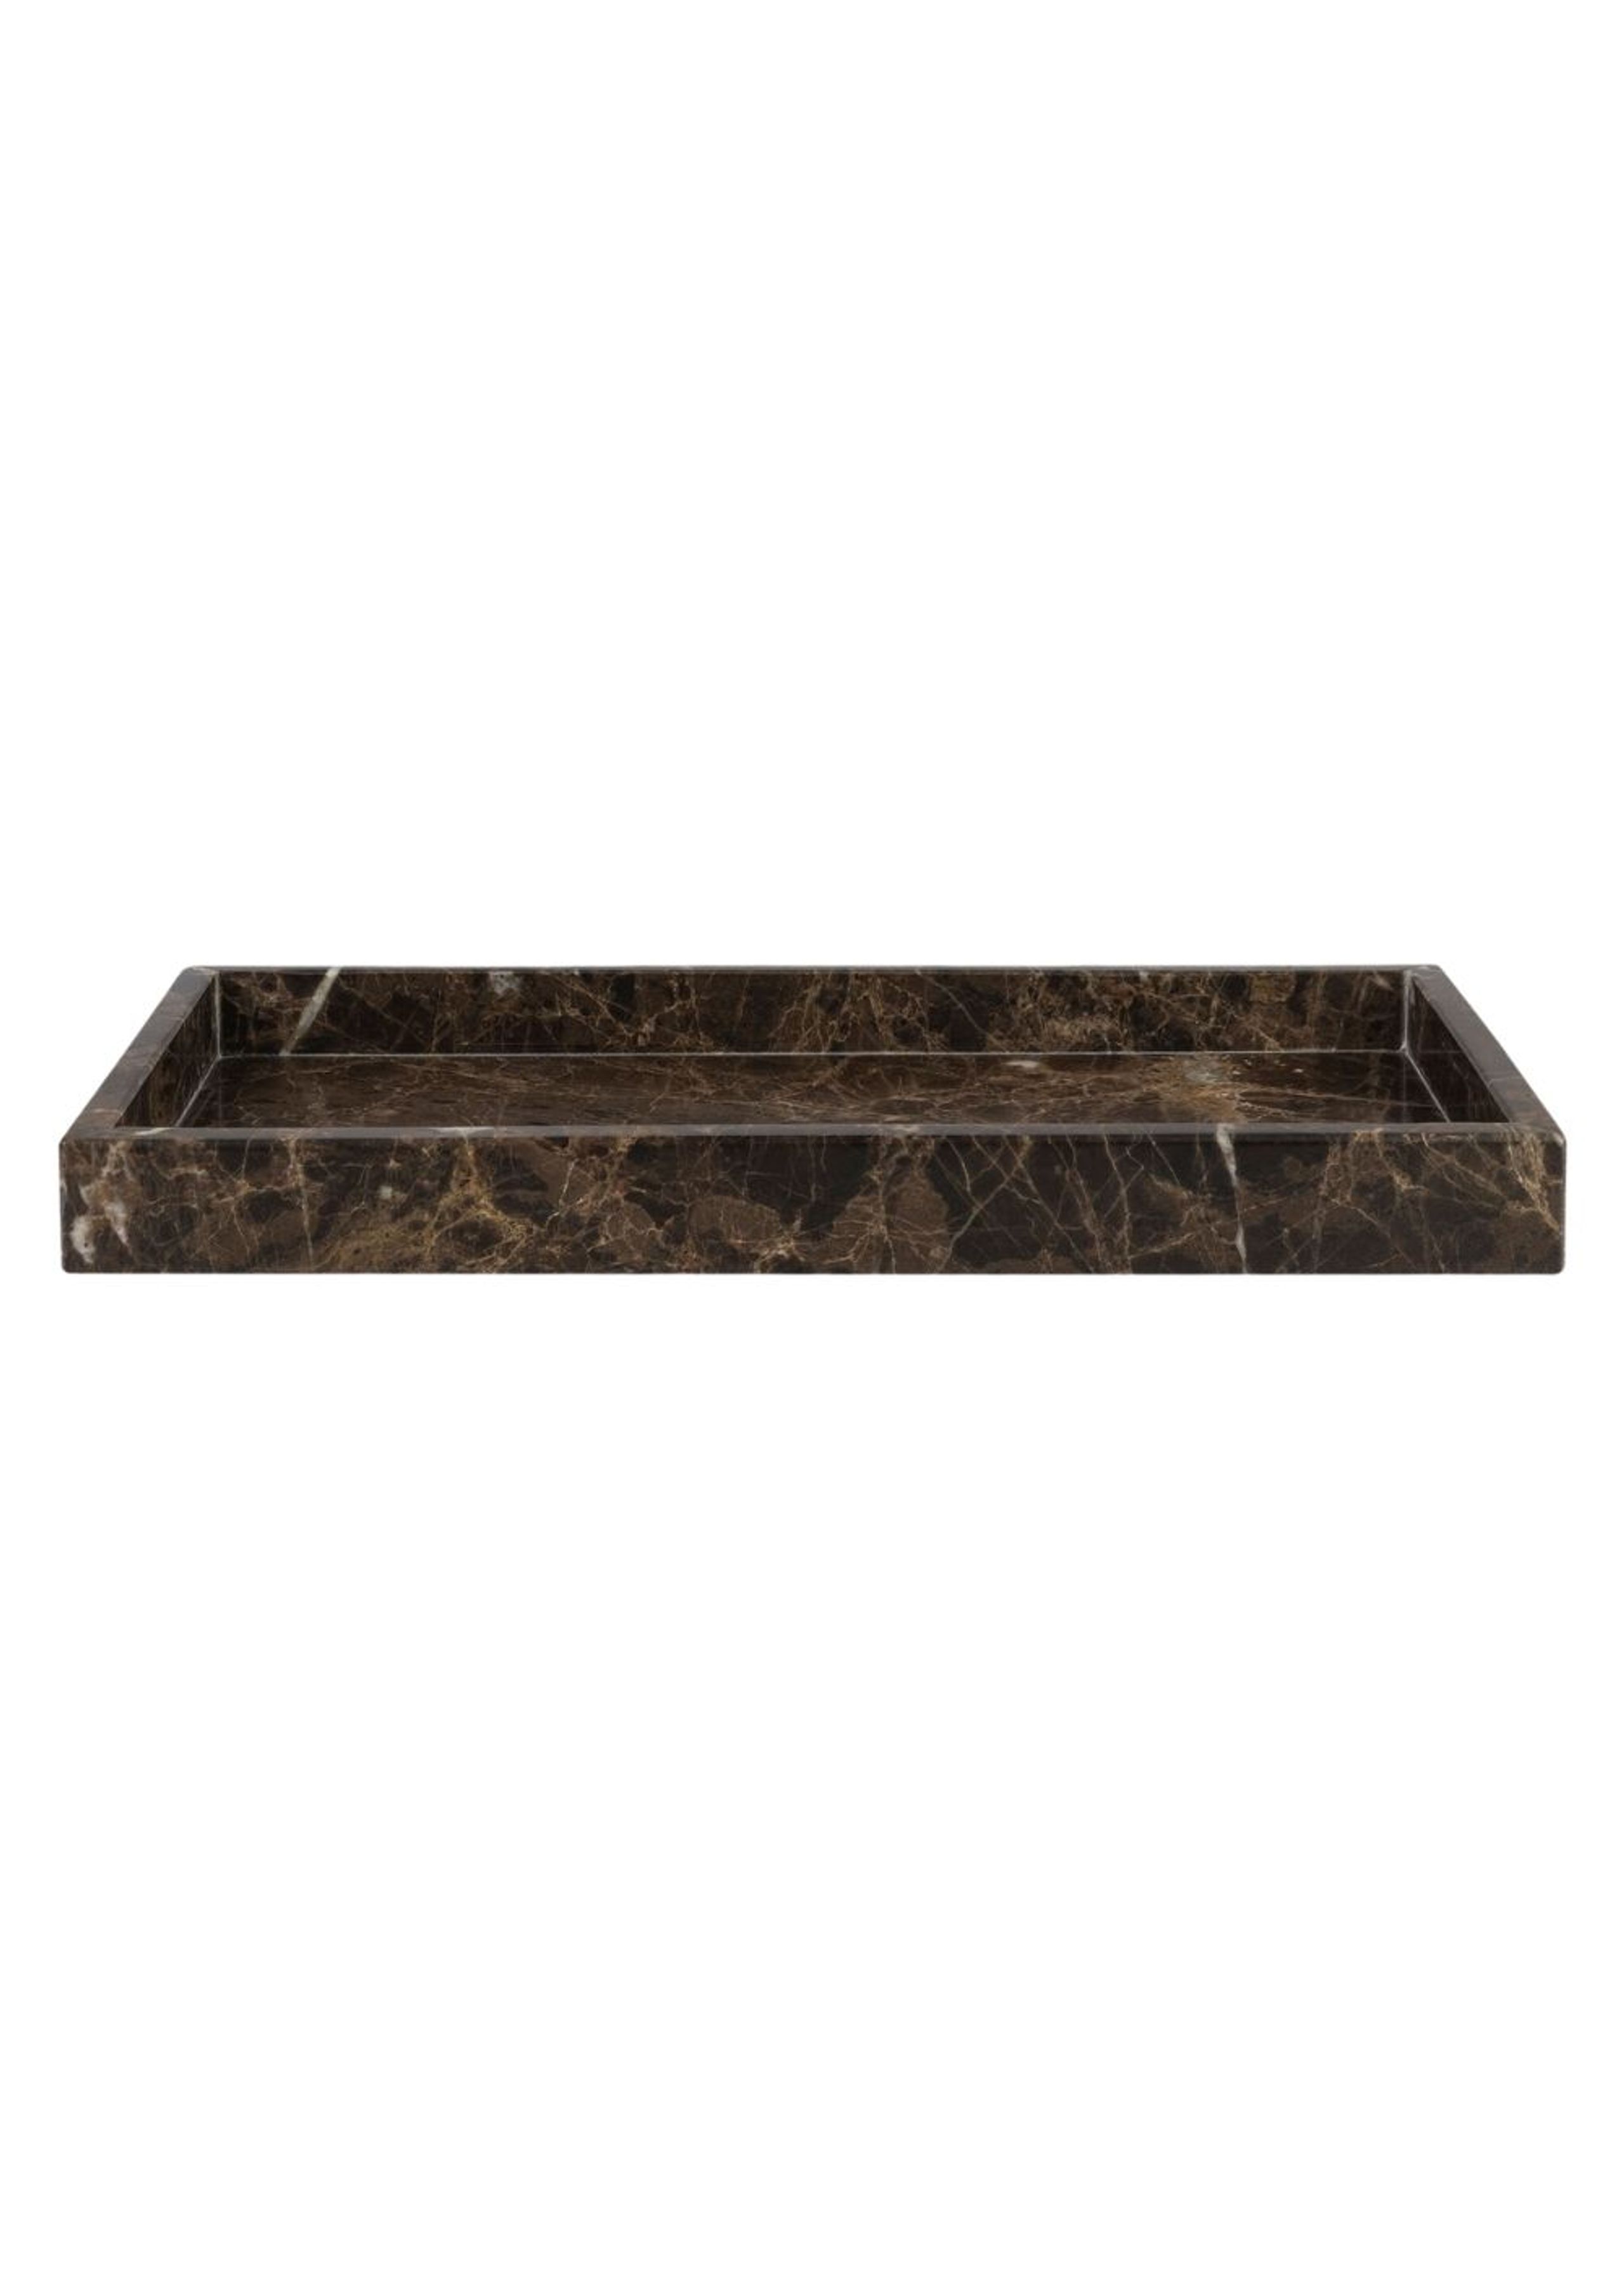 Mette Ditmer - Tablett - MARBLE Deco Tray  - Brown